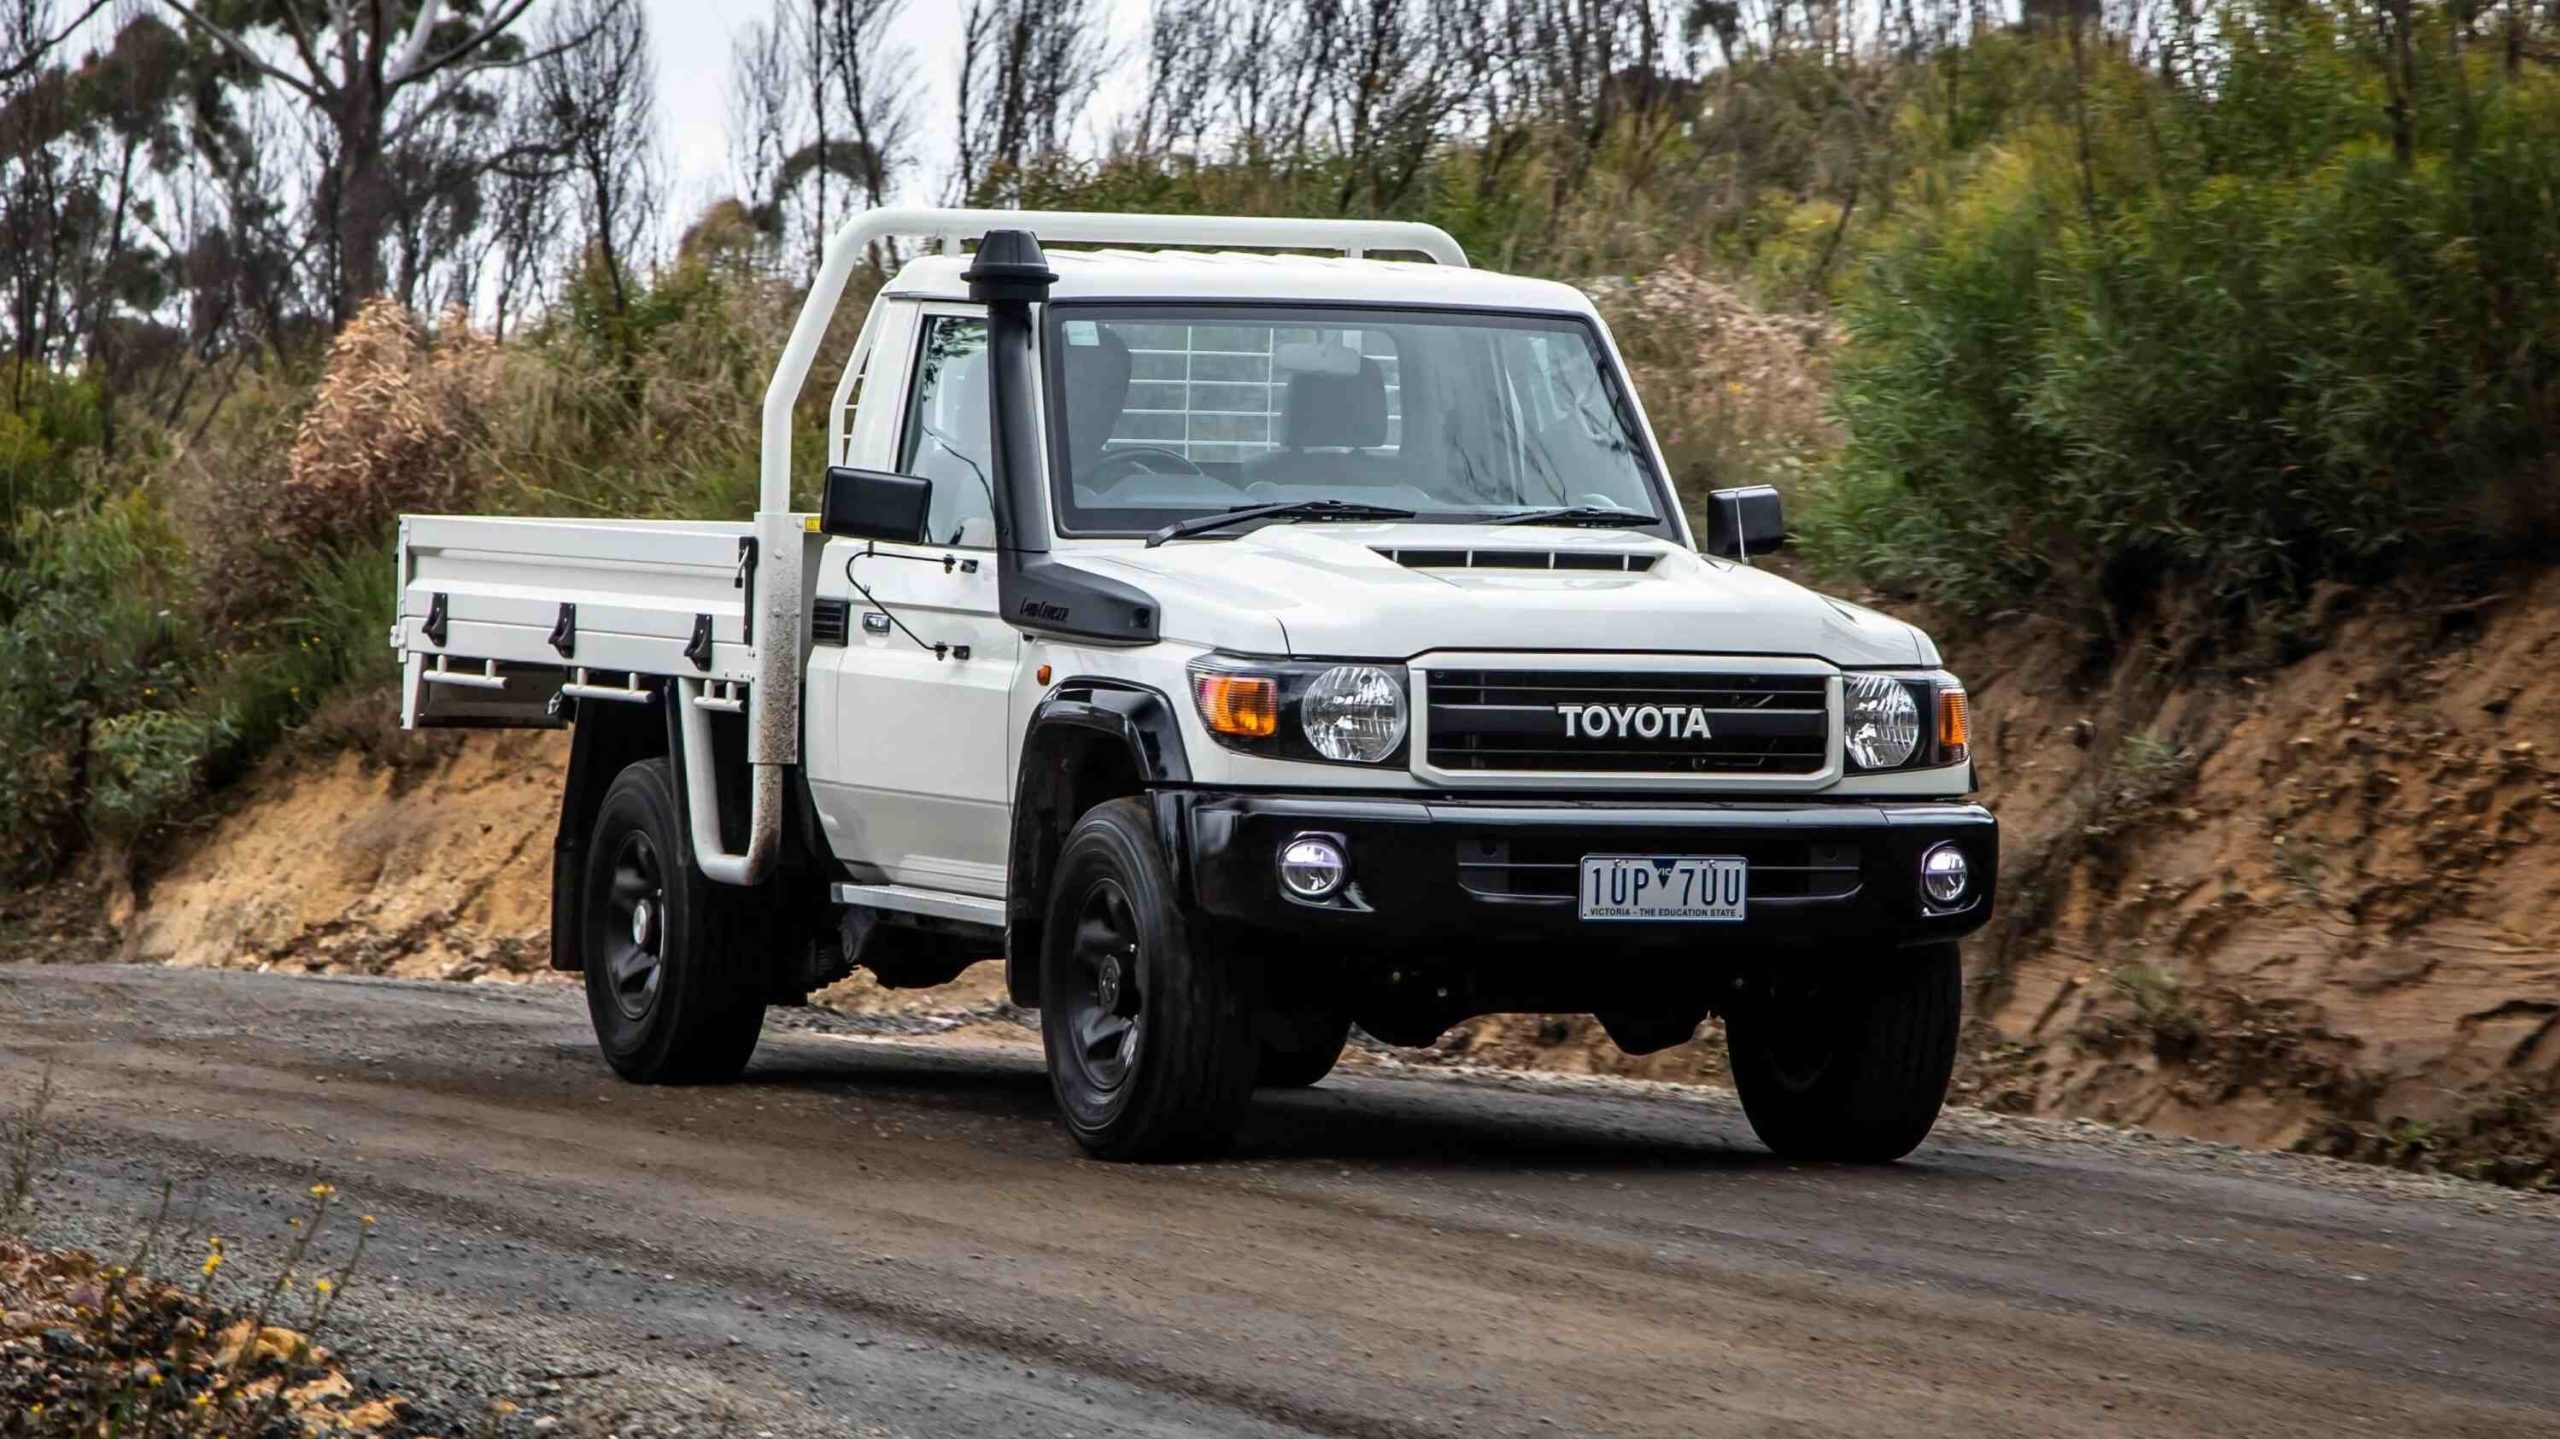 Surging Demand: Toyota's Four-Cylinder Land Cruiser 70 Series Shakes Up Market Expectations